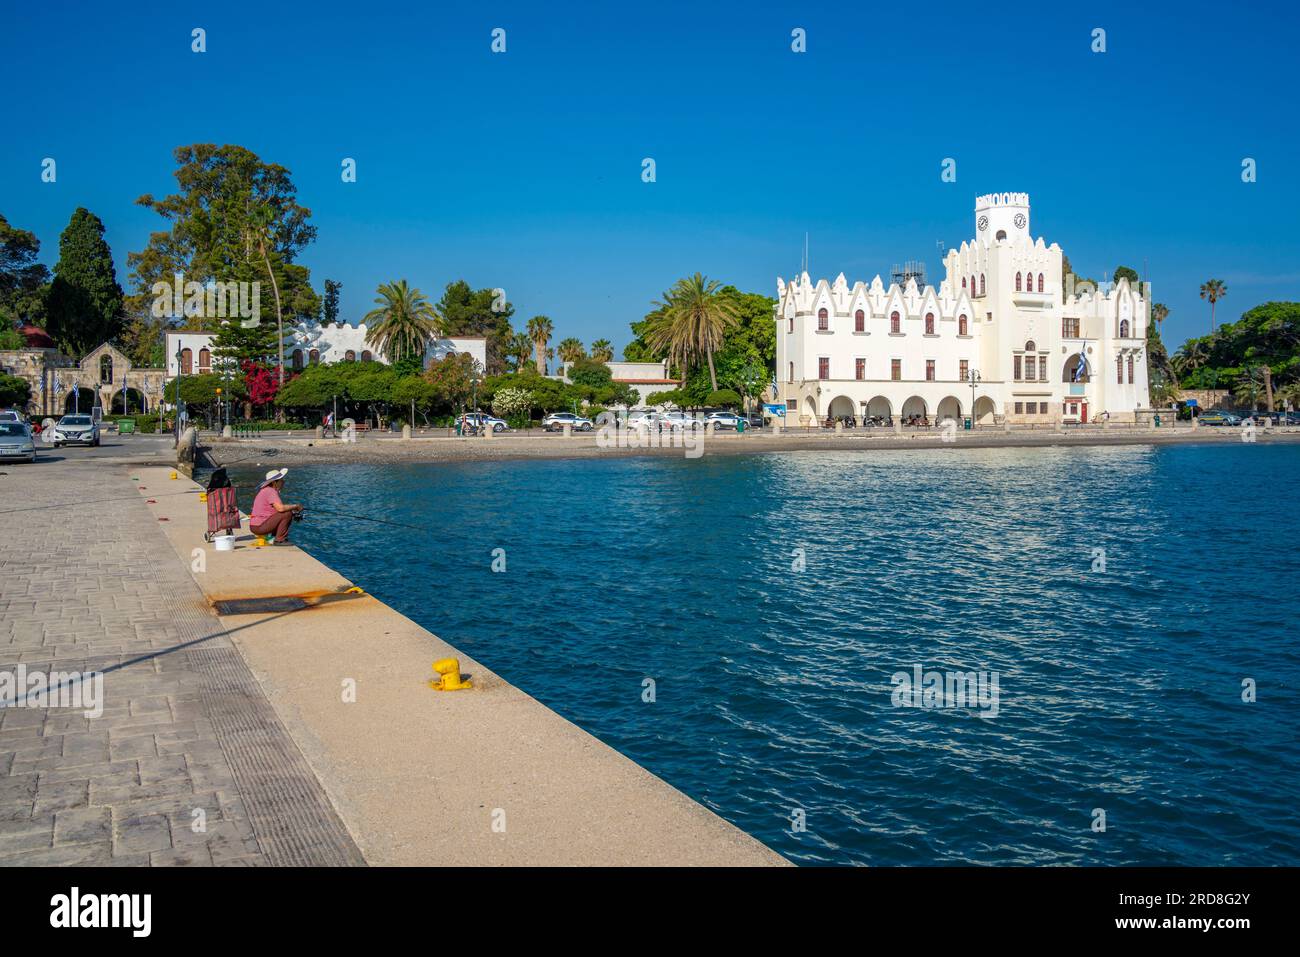 View of man fishing and County Government Office, Kos Town, Kos, Dodecanese, Greek Islands, Greece, Europe Stock Photo